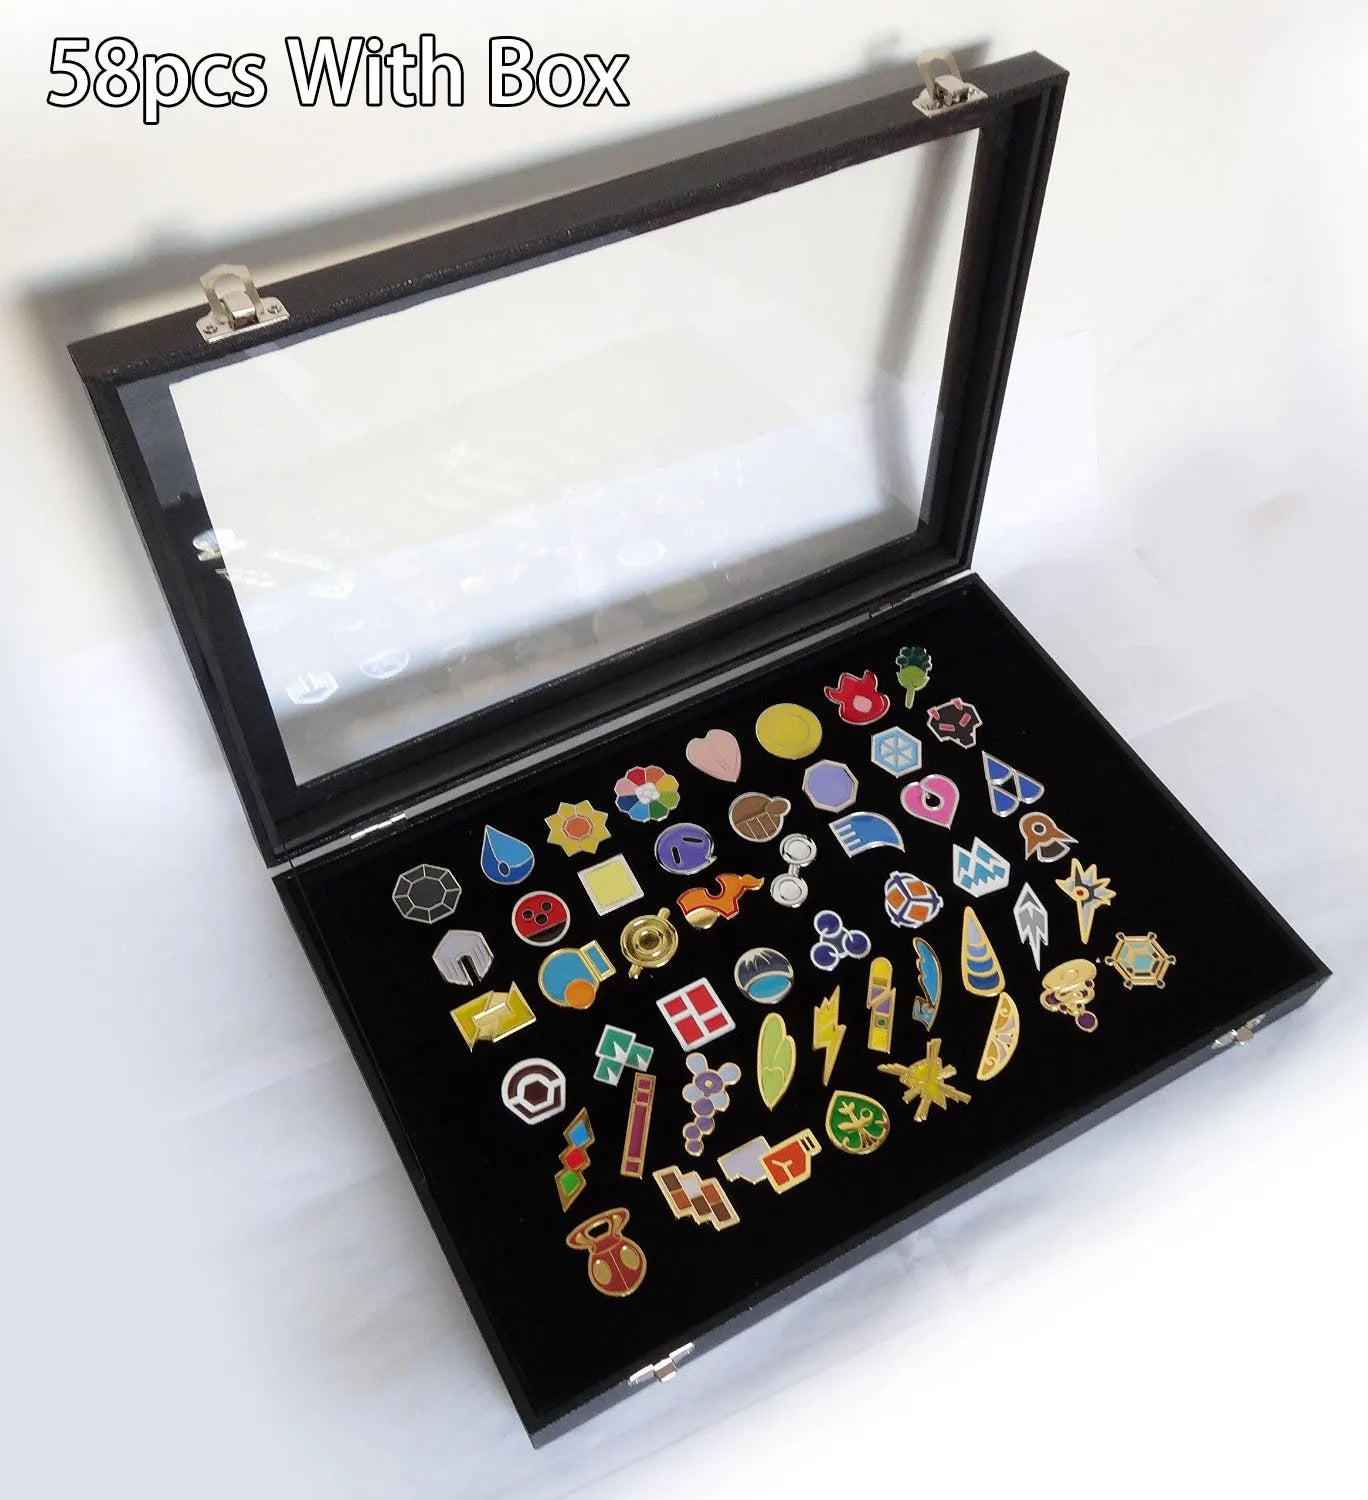 Pokemon Gym Badges Collection - Kanto Johto Hoenn Sinnoh Pins Brooches - Unique Pocket Monster Gift-58Pcs With box-